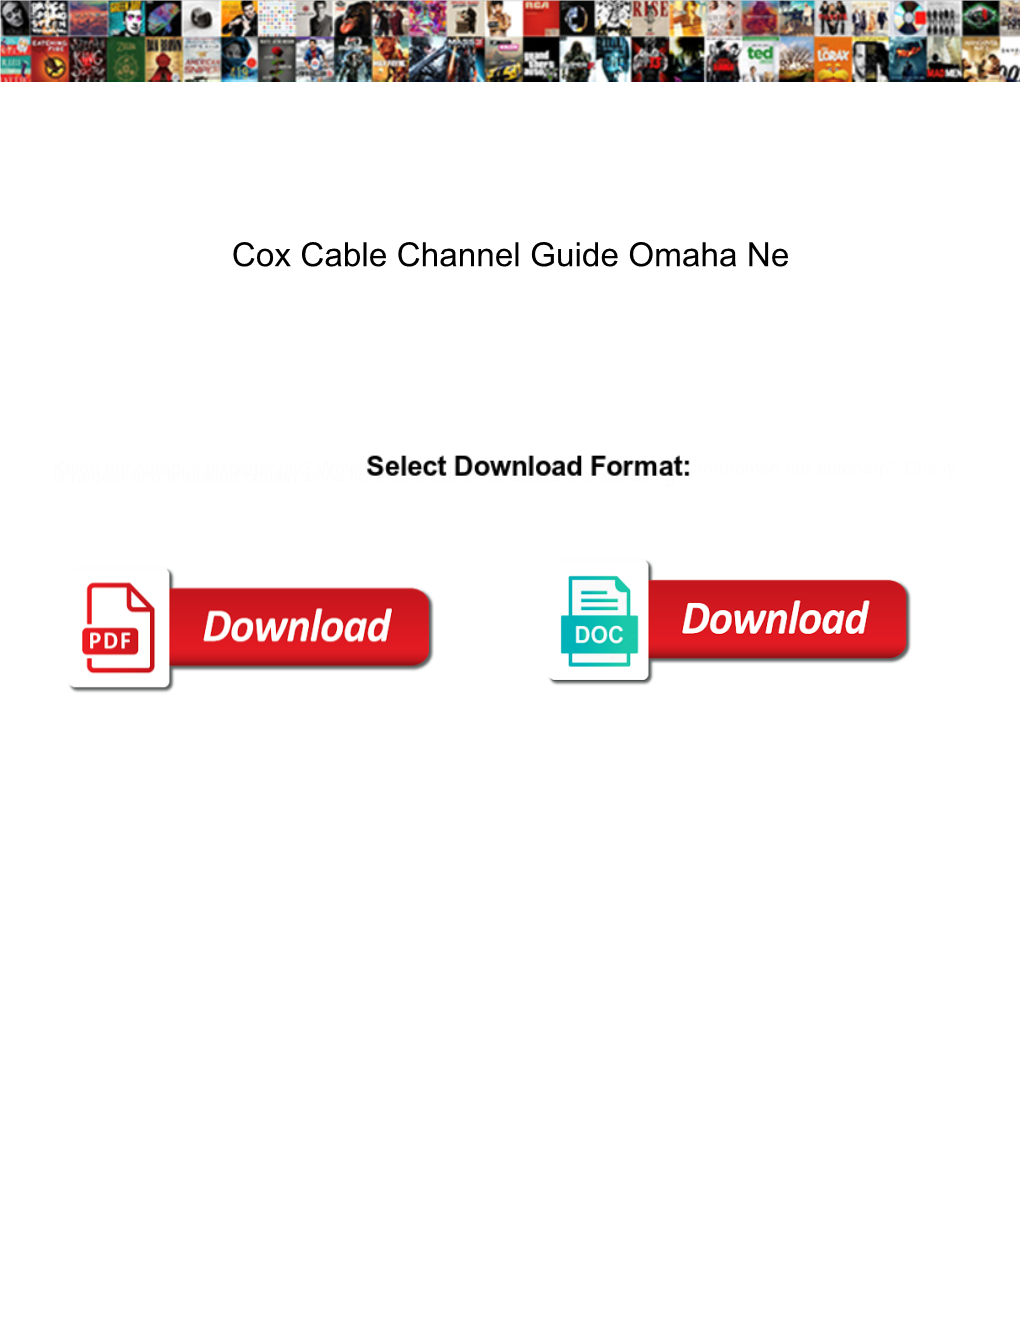 Cox Cable Channel Guide Omaha Ne